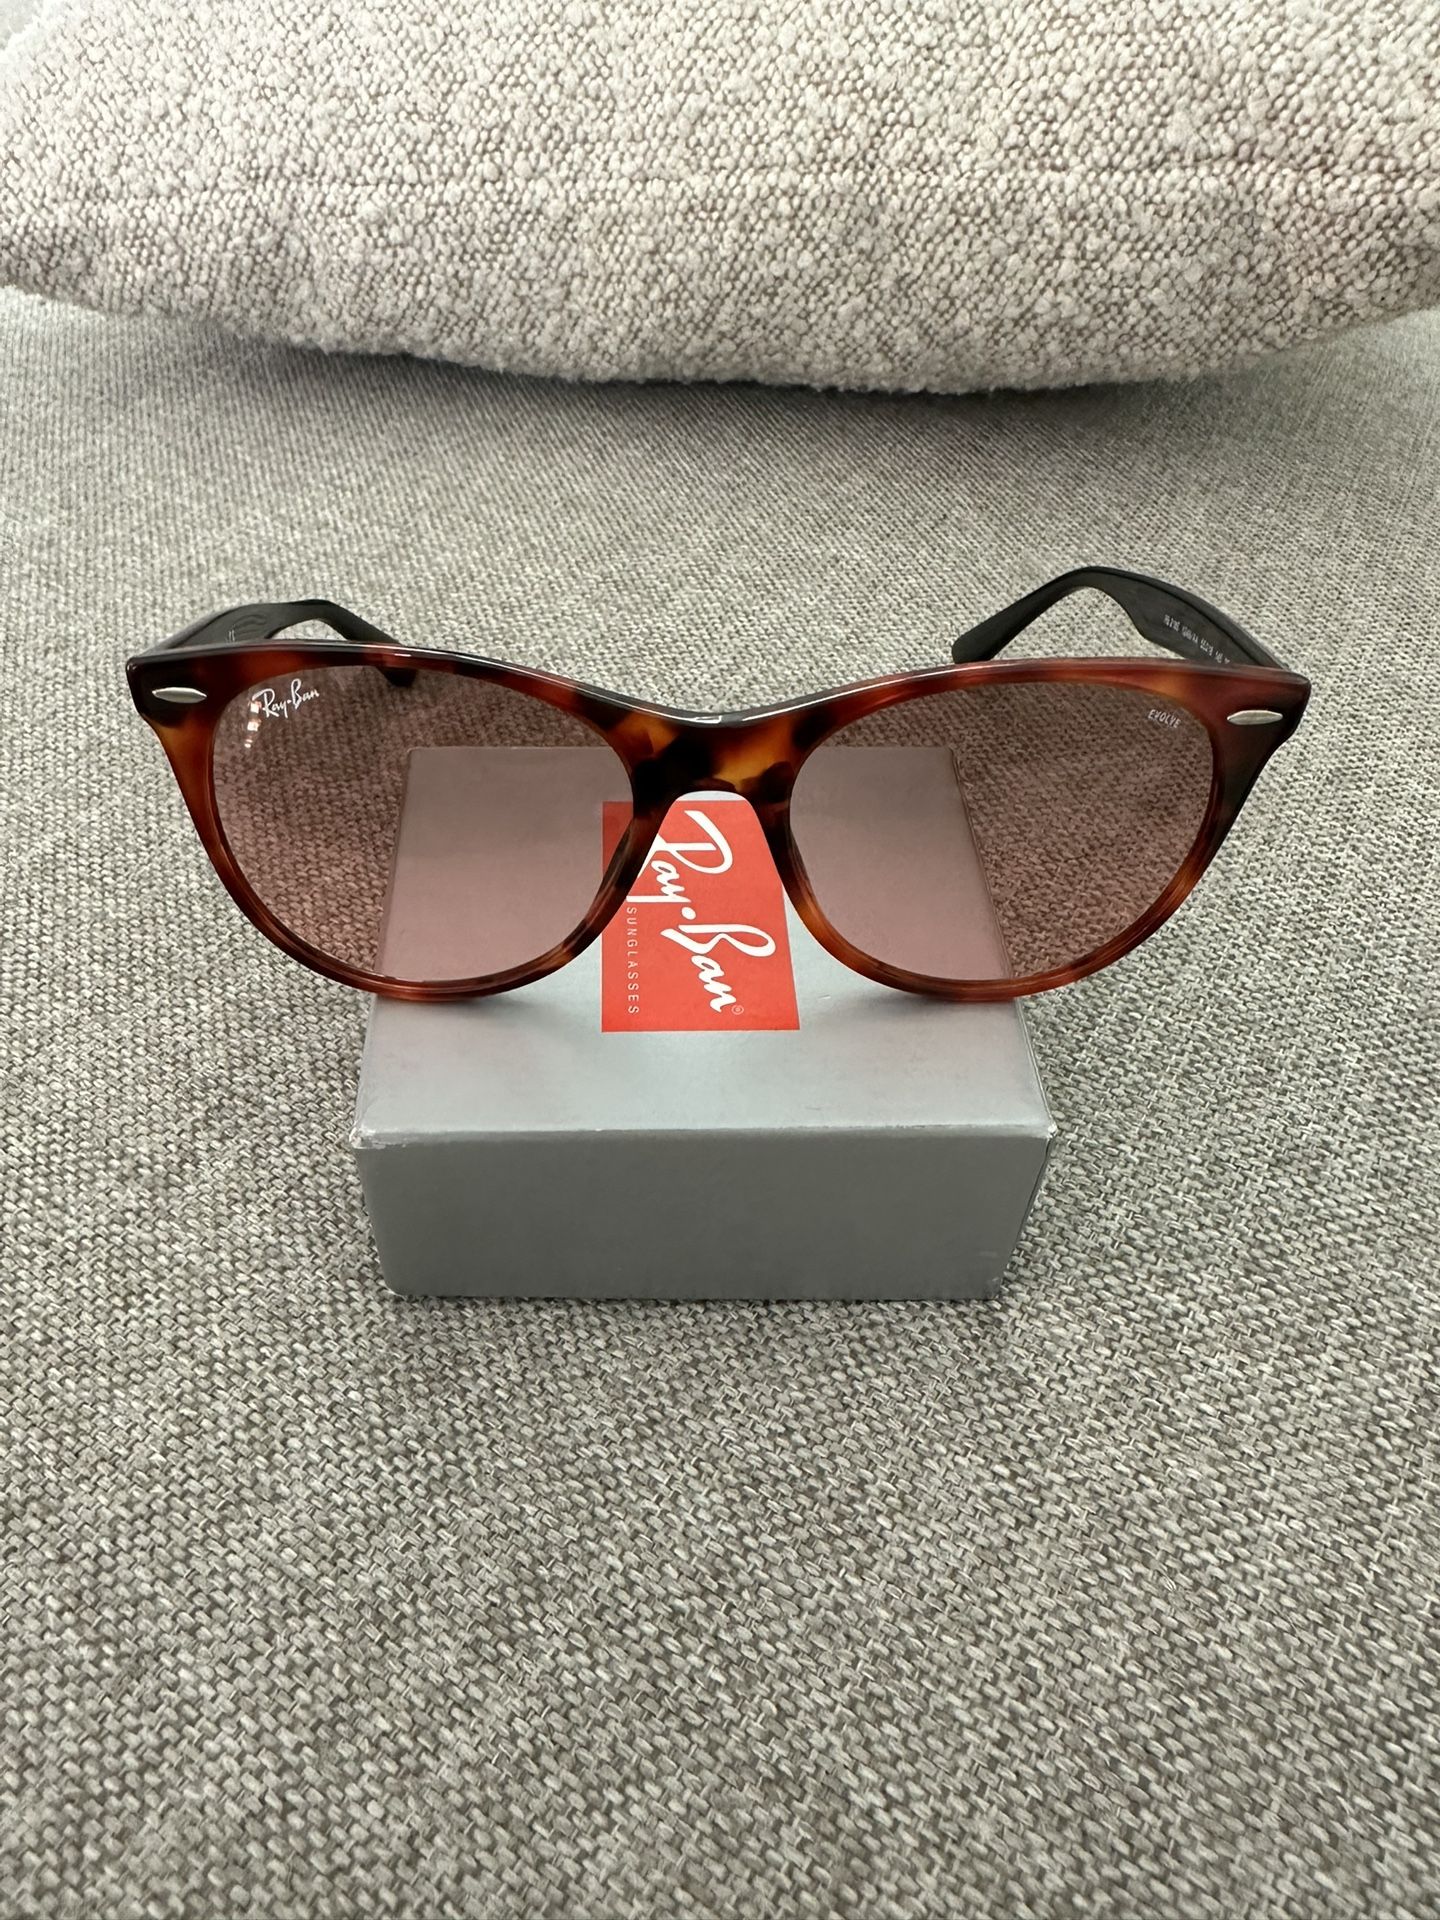 Ray Ban Sunglasses NEW PRICE (FIRM)